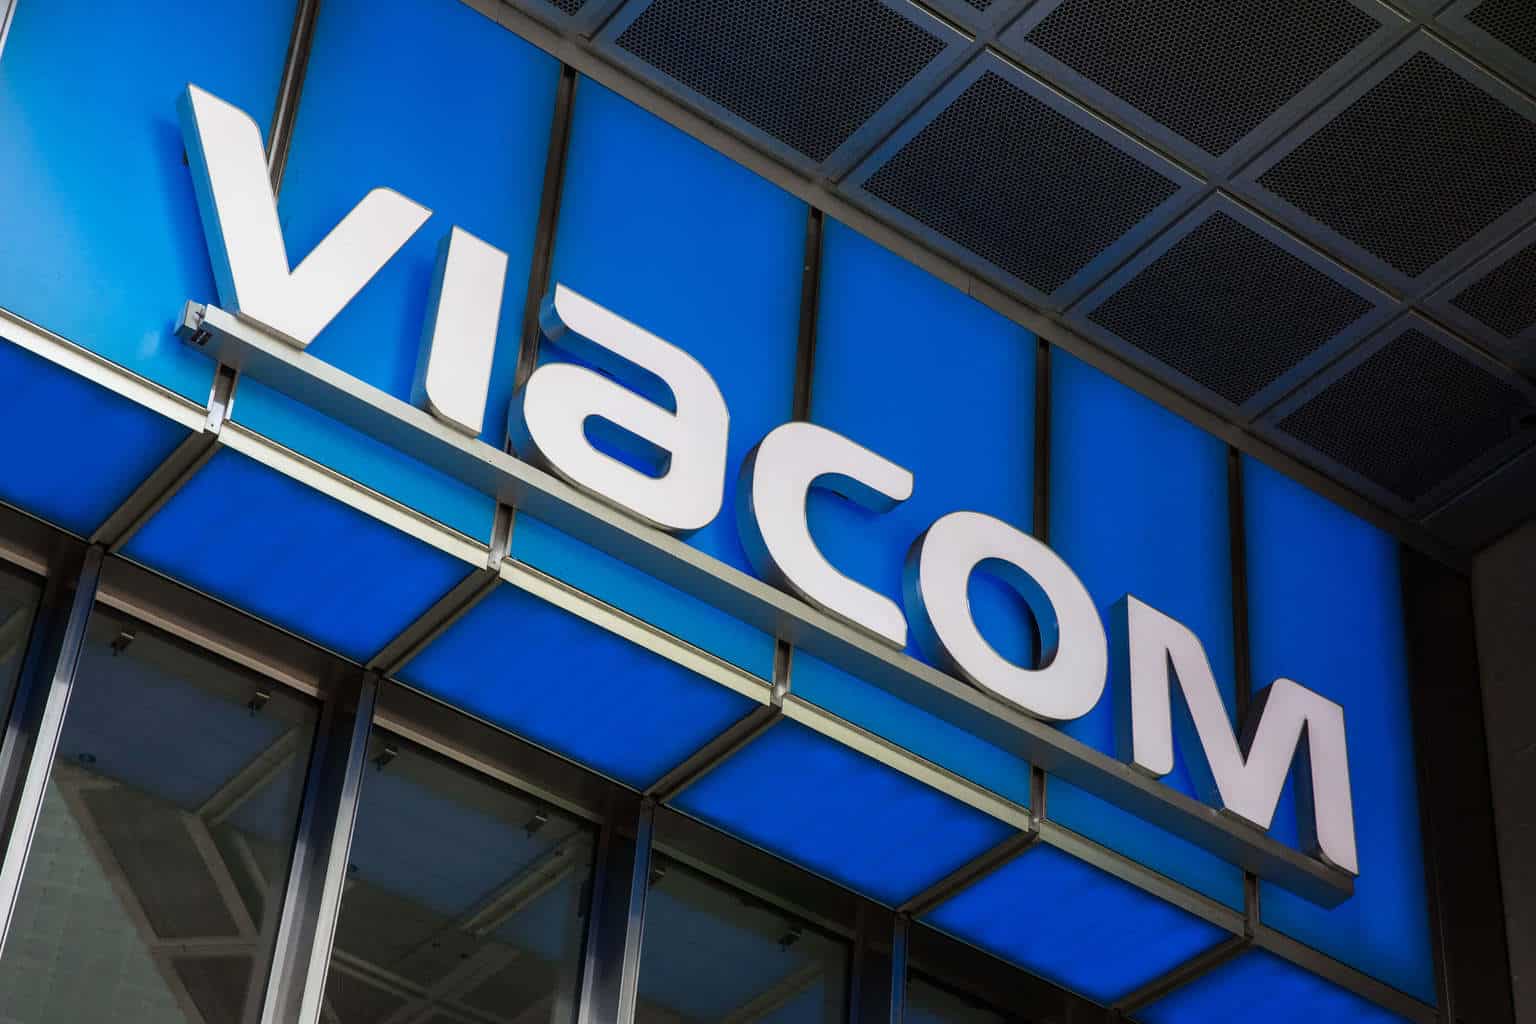 Viacom and CBS Race Against Time to Announce A Deal